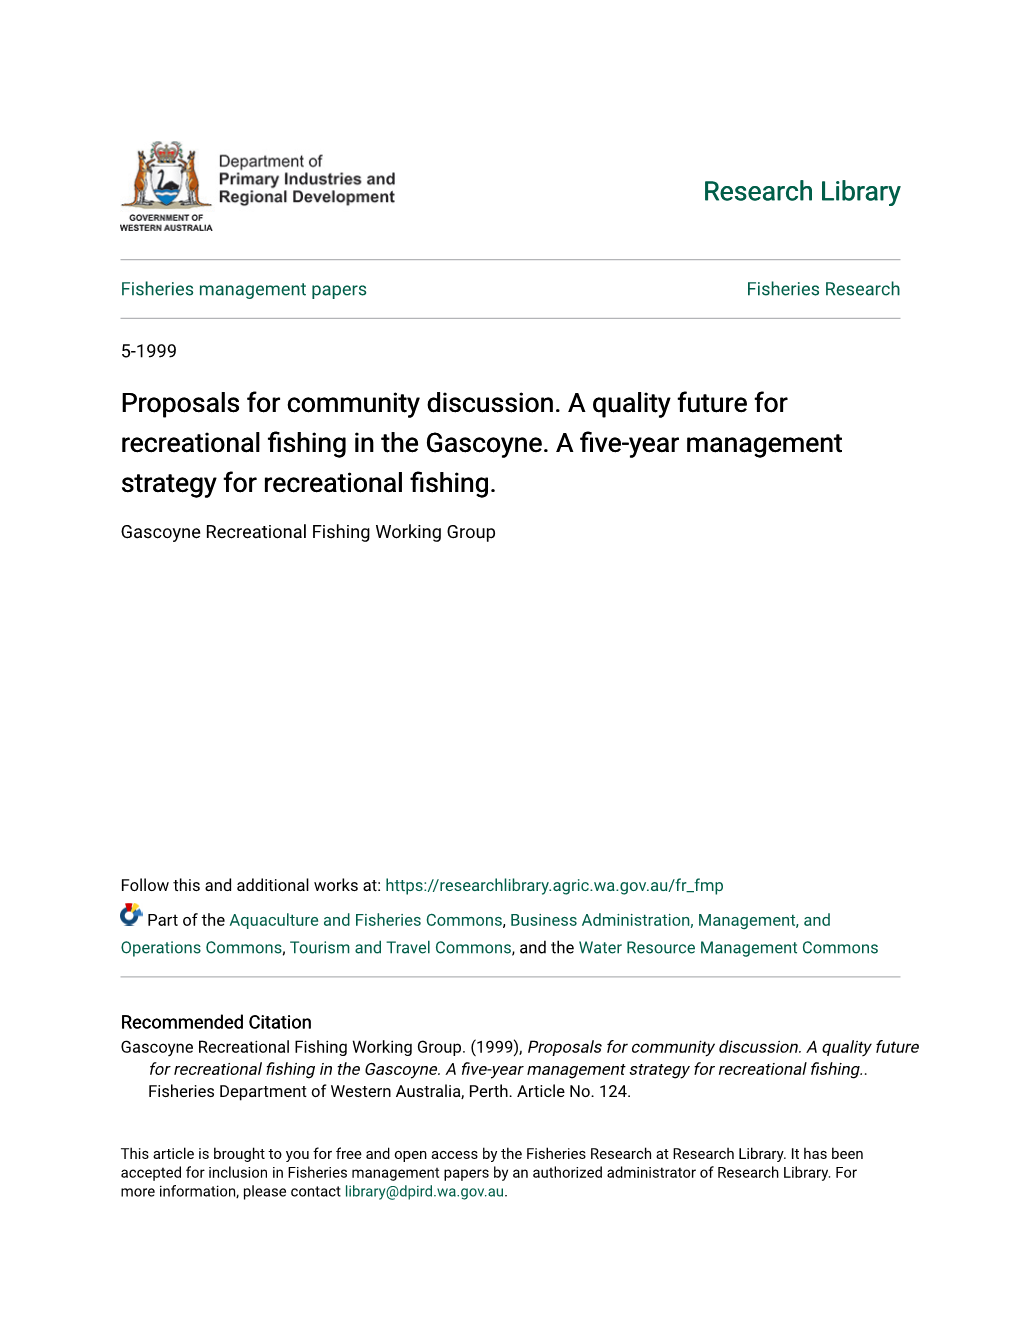 Proposals for Community Discussion. a Quality Future for Recreational Fishing in the Gascoyne